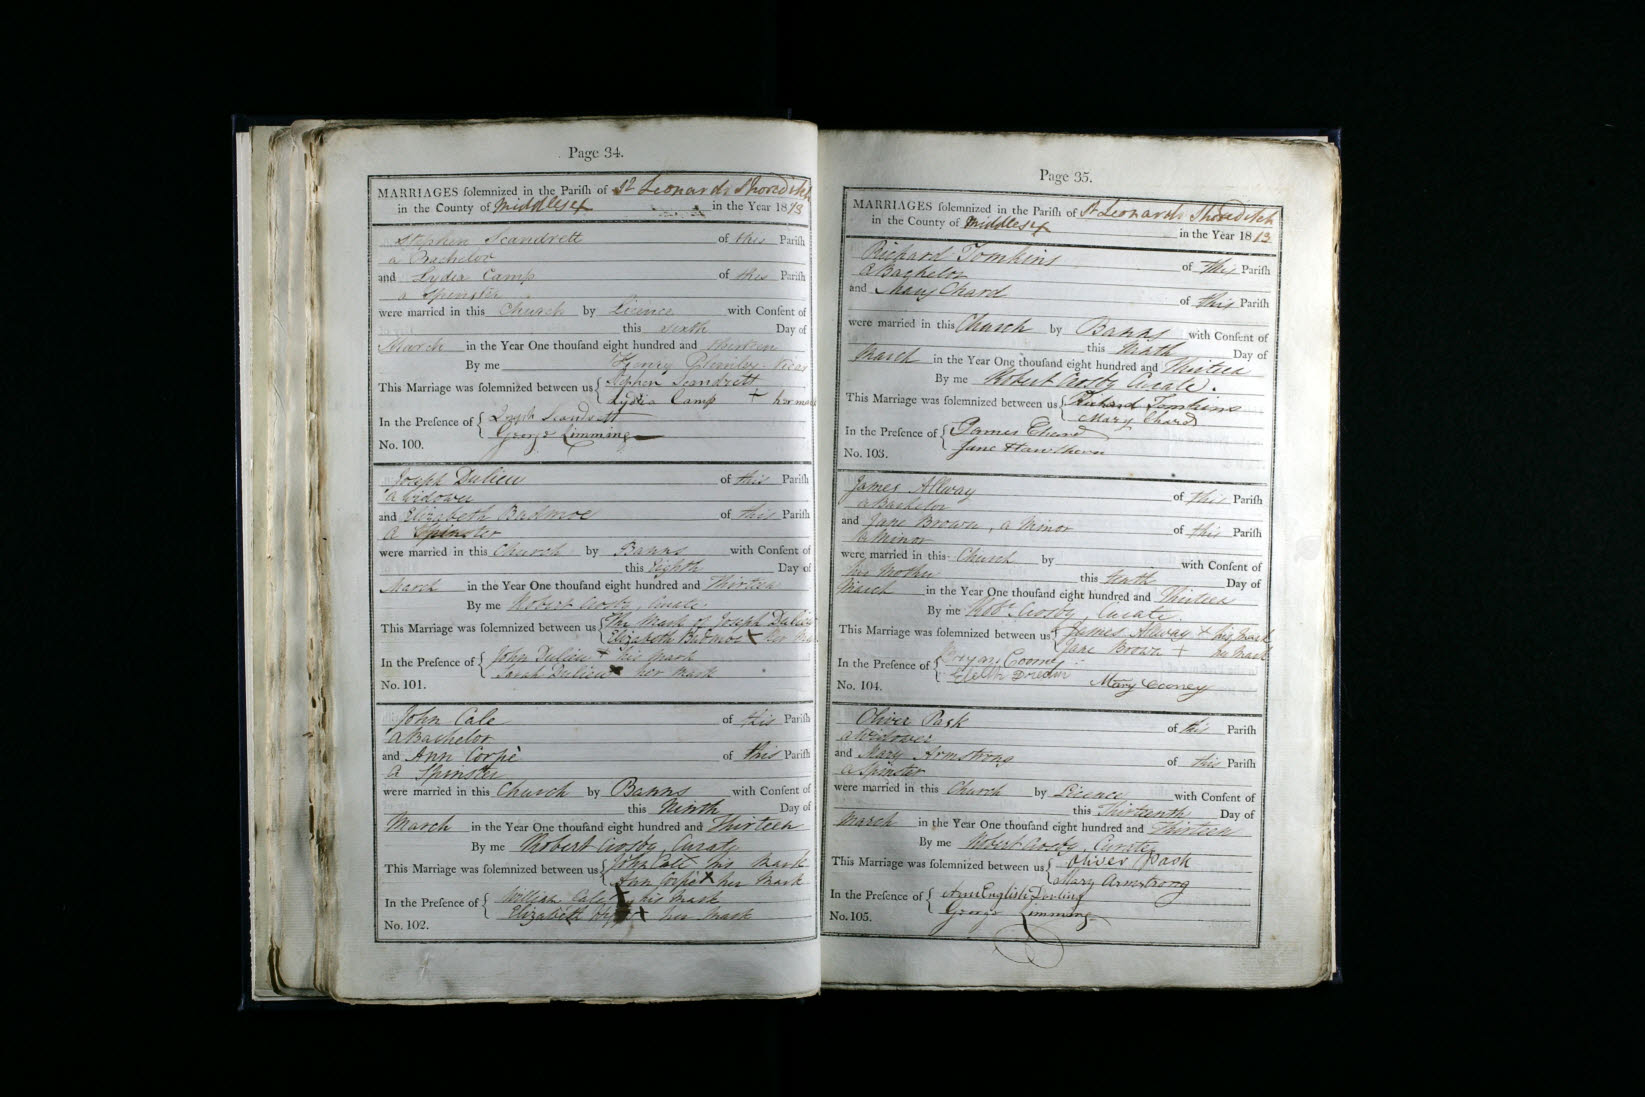 1813 marriage of Mary Armstrong to Oliver Pask